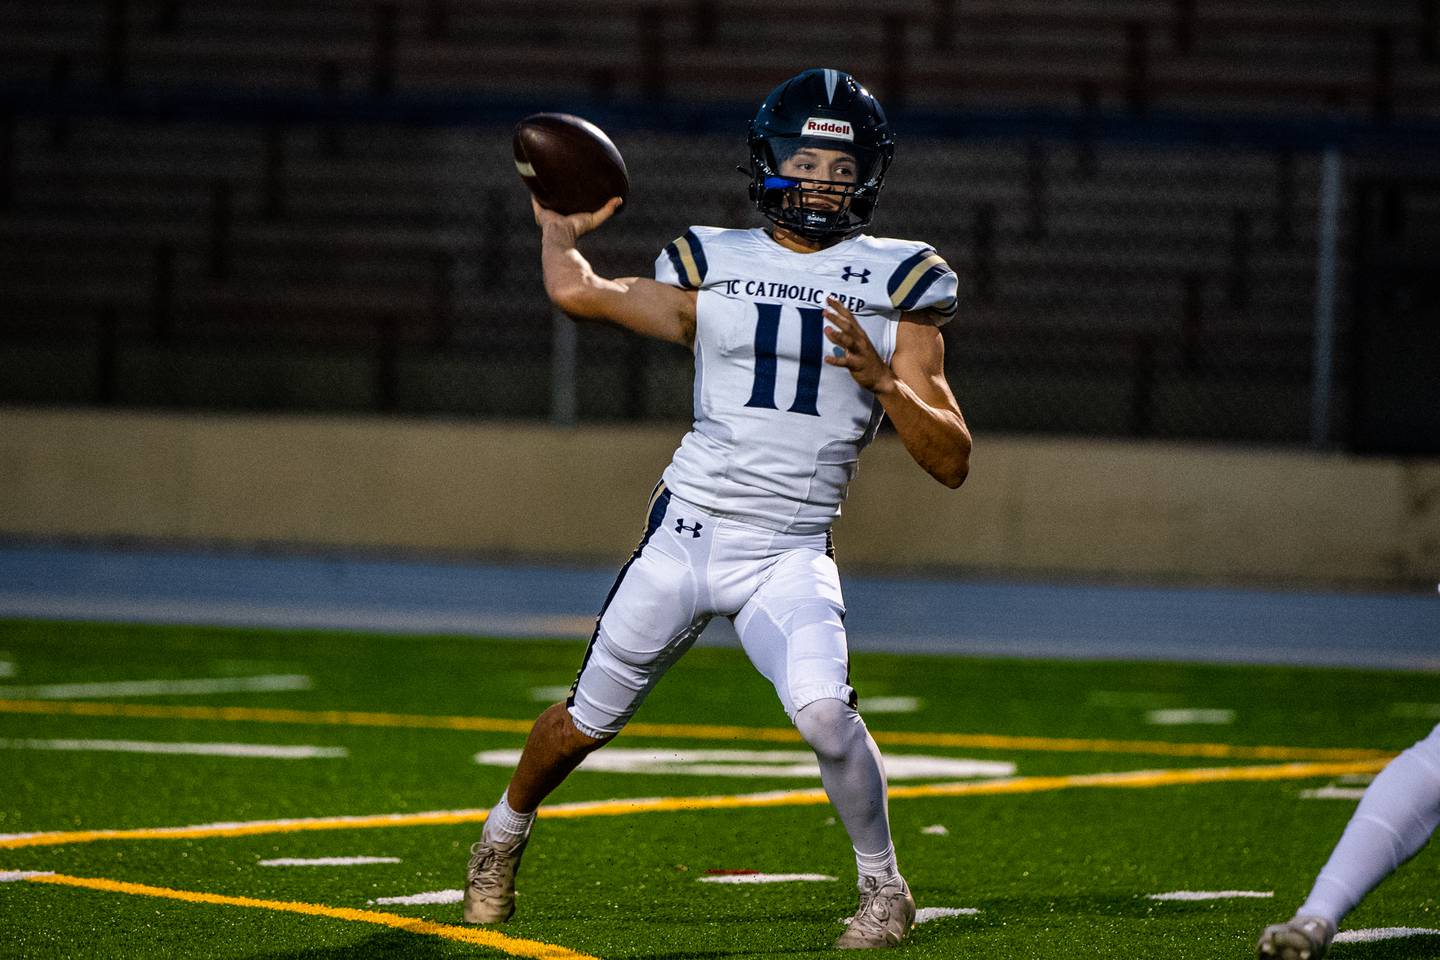 Immaculate Conception's Dennis Mandala throws a pass during a game against Joliet Catholic Academy on Friday, Sept. 2, 2022, at Memorial Stadium in Joliet.